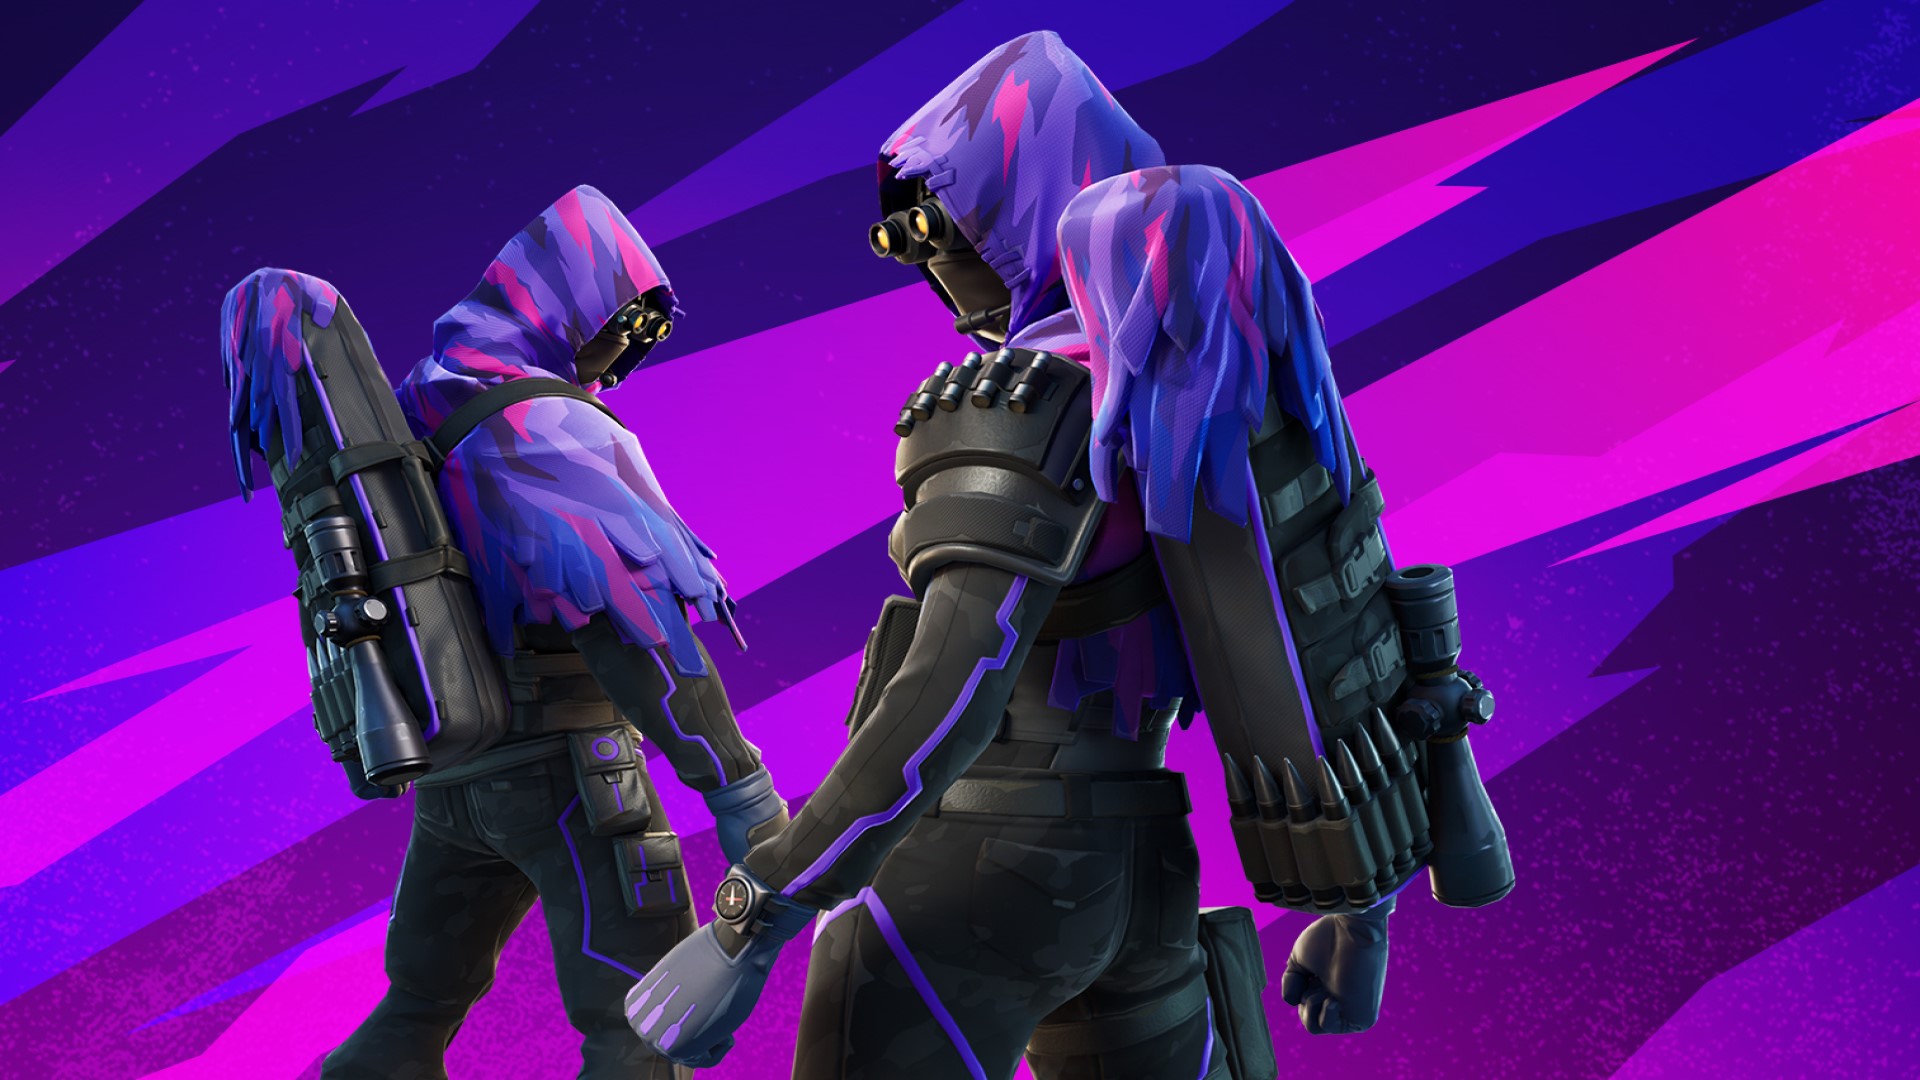 Best mobile multiplayer games: Fortnite. Image shows two armed, hooded and masked figures.